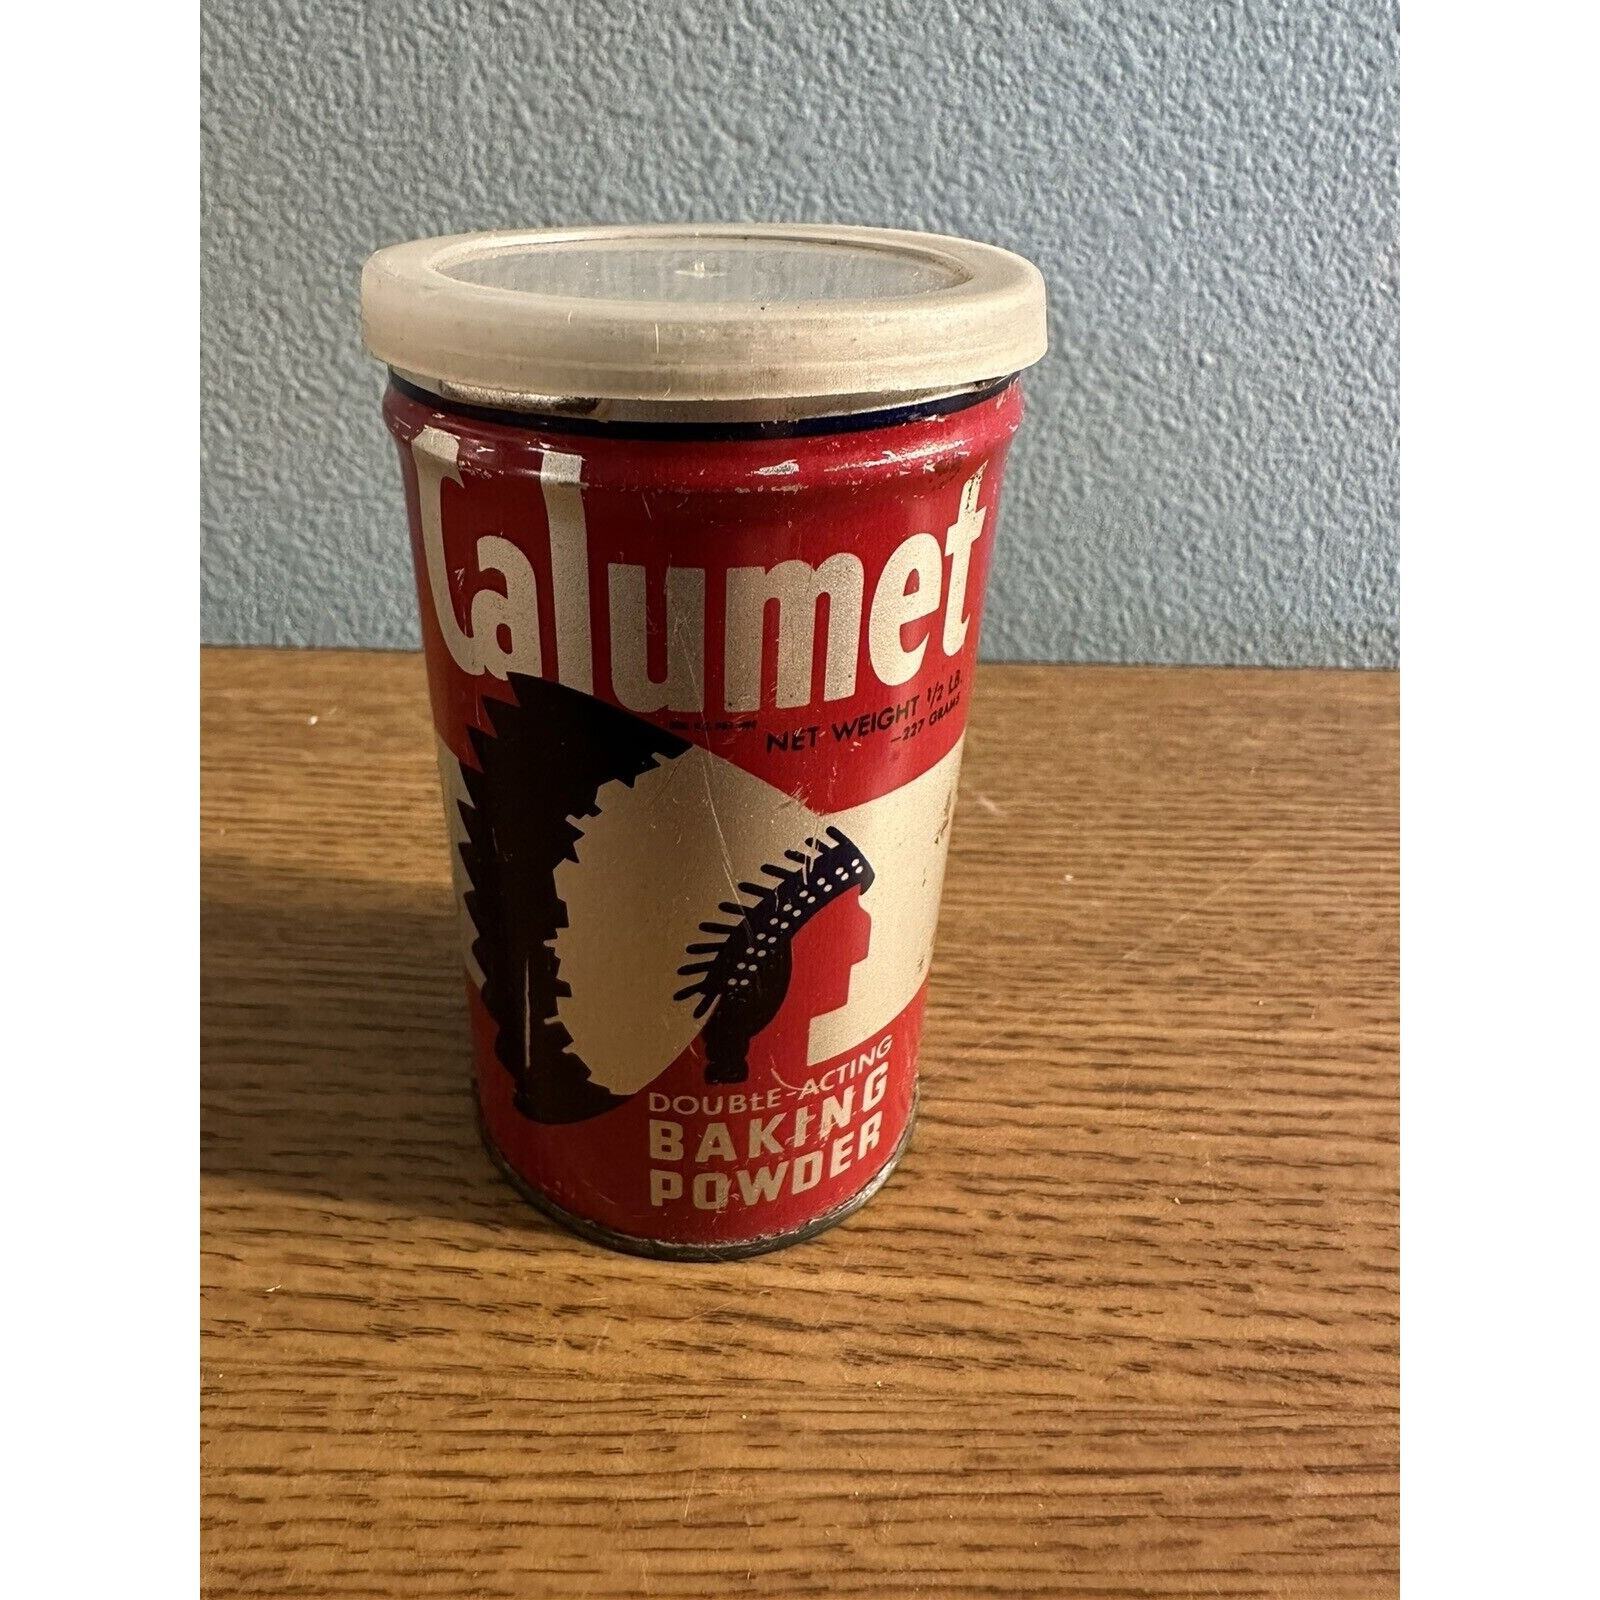 Vintage Calumet Double-Acting Baking Powder 1/2 lb. Tin with Lid